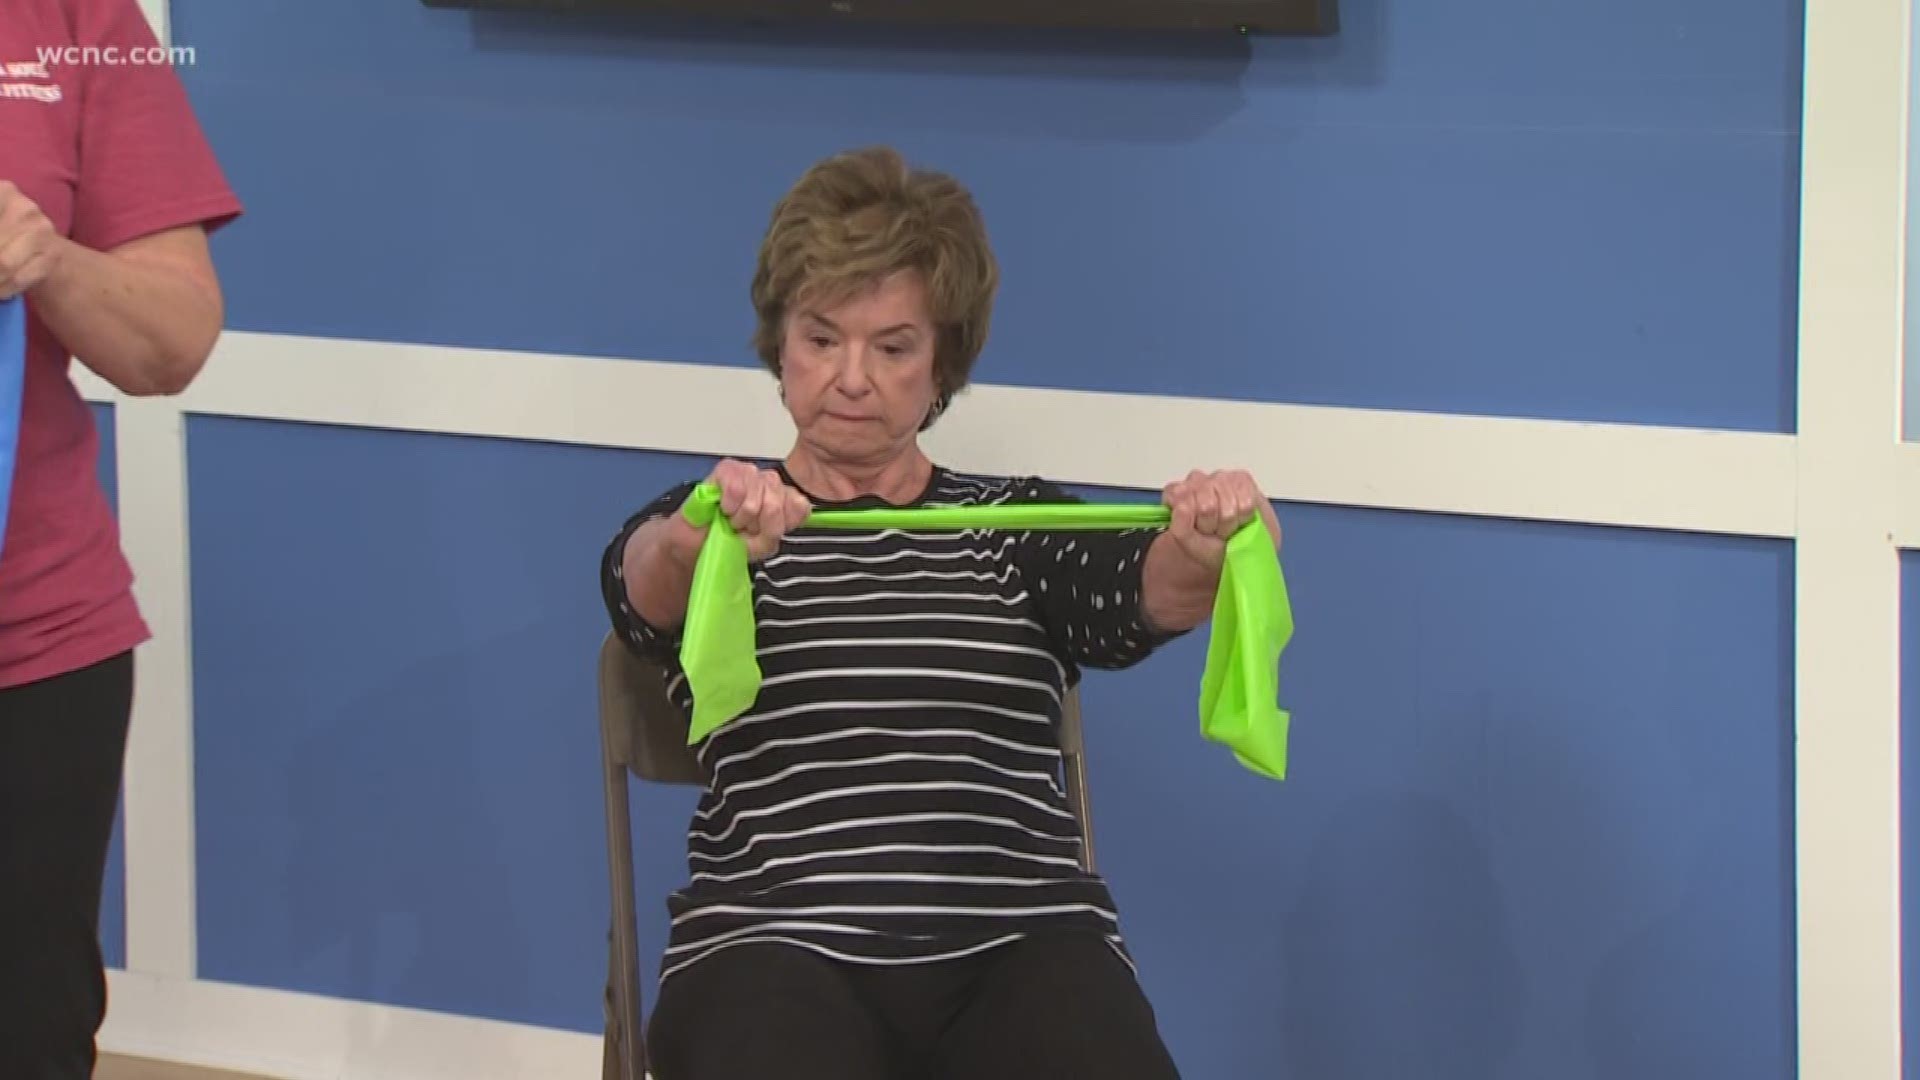 Body and Soul Senior Fitness shows us why resistance bands are so effective